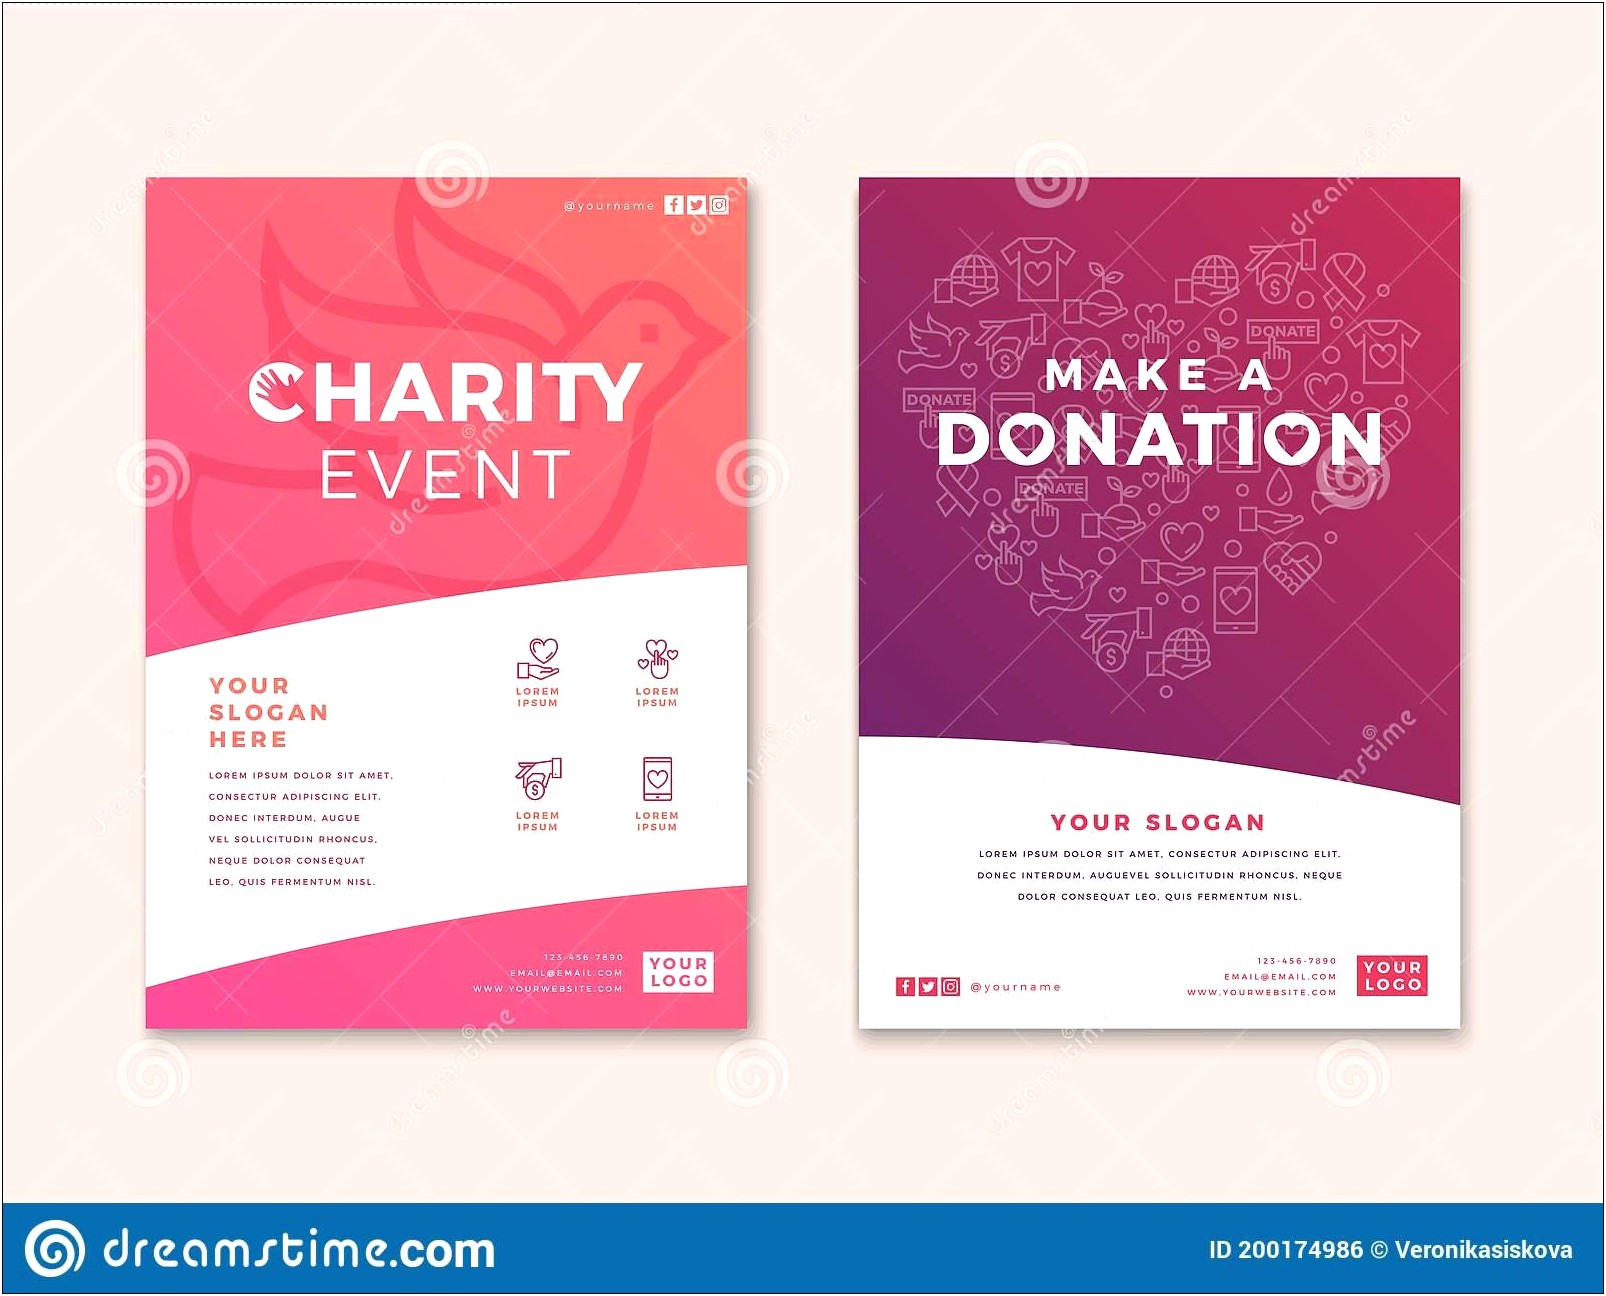 Charity Event Flyer Template Free Download